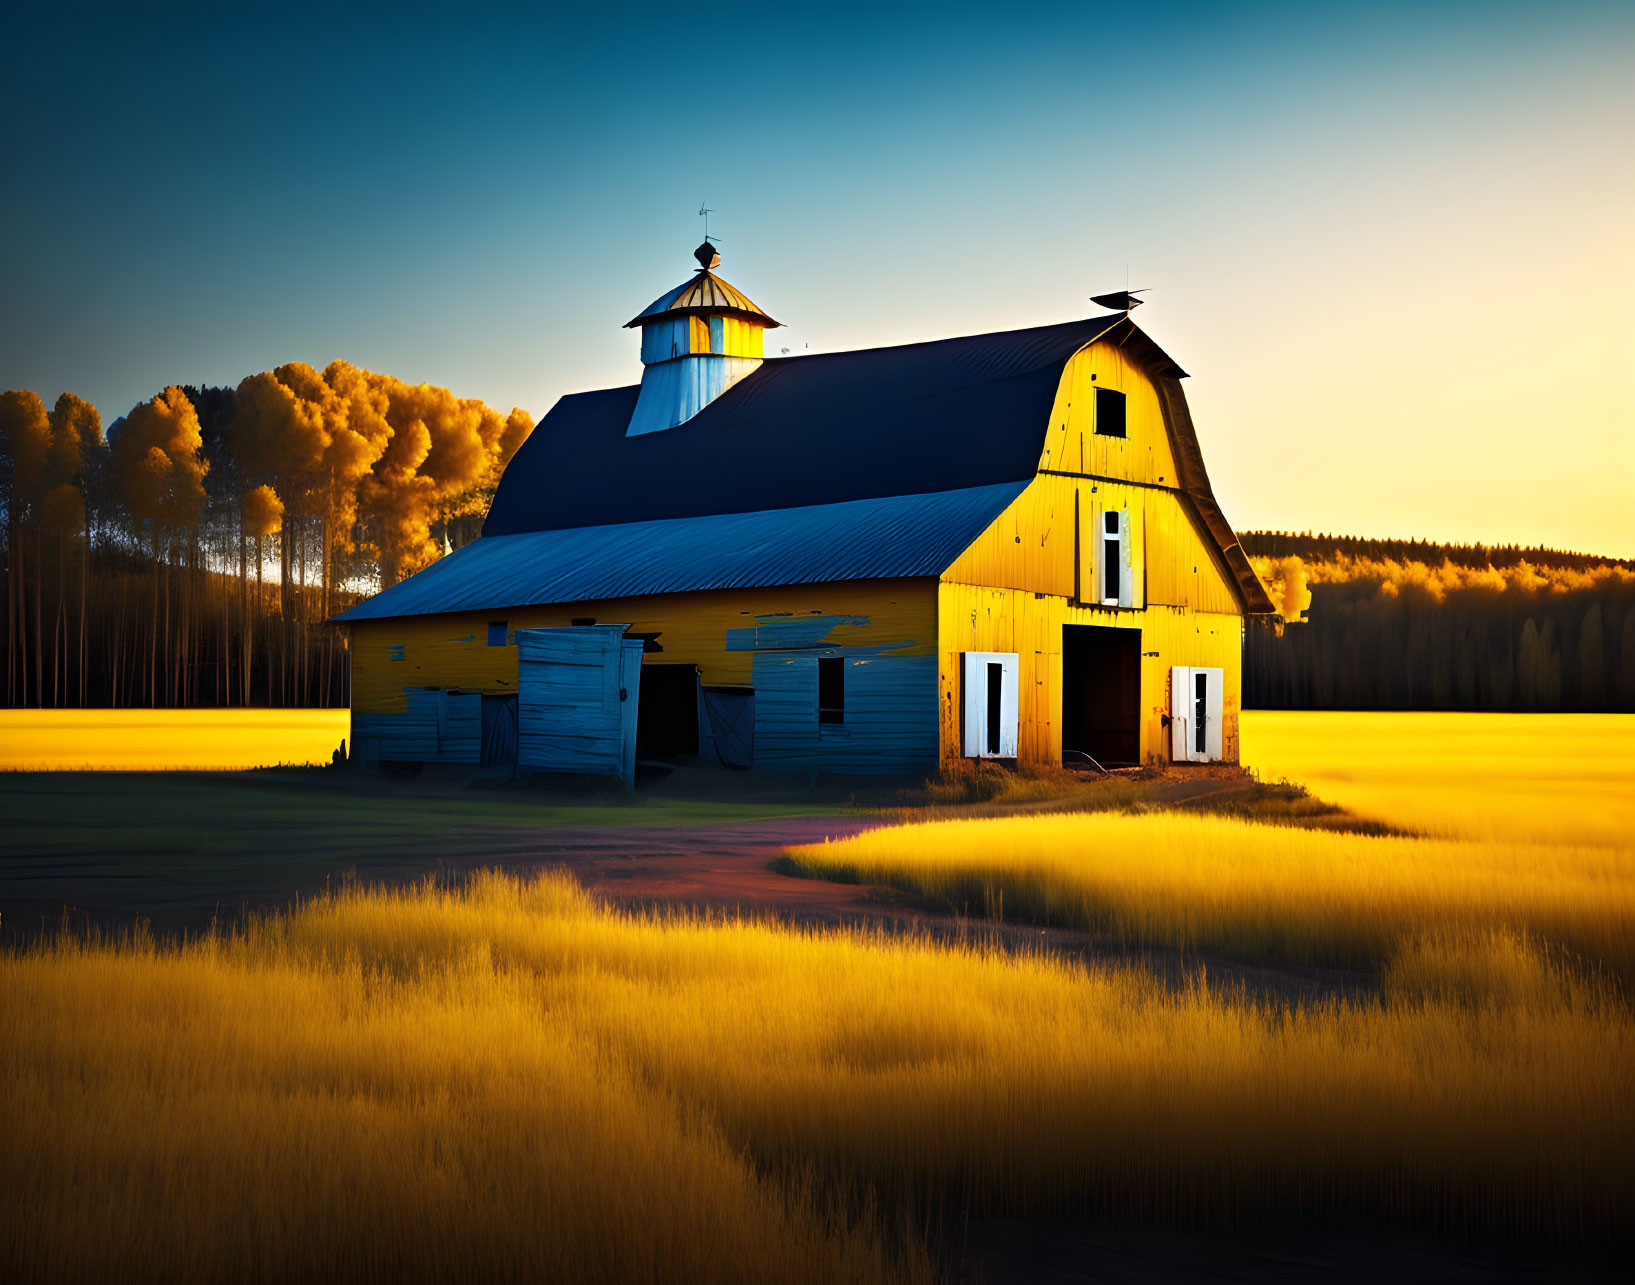 Yellow Barn in Golden Field with Trees and Sky at Dawn or Dusk